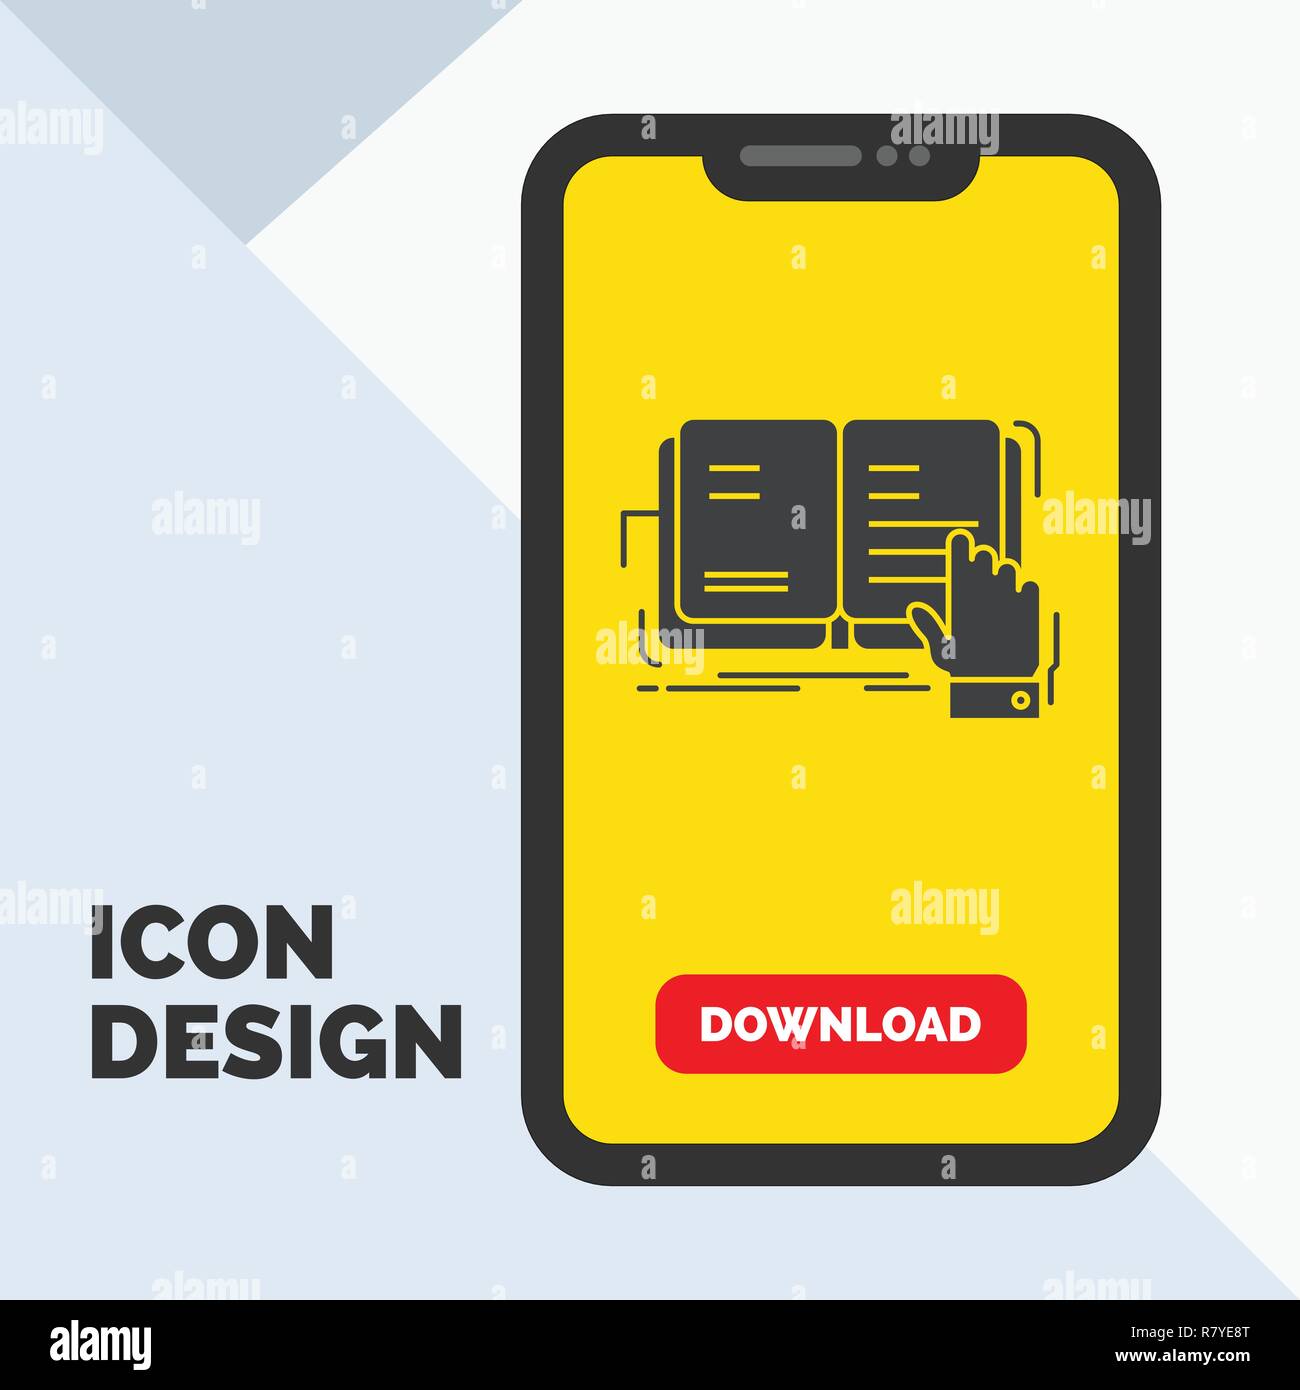 book, lesson, study, literature, reading Glyph Icon in Mobile for Download Page. Yellow Background Stock Vector